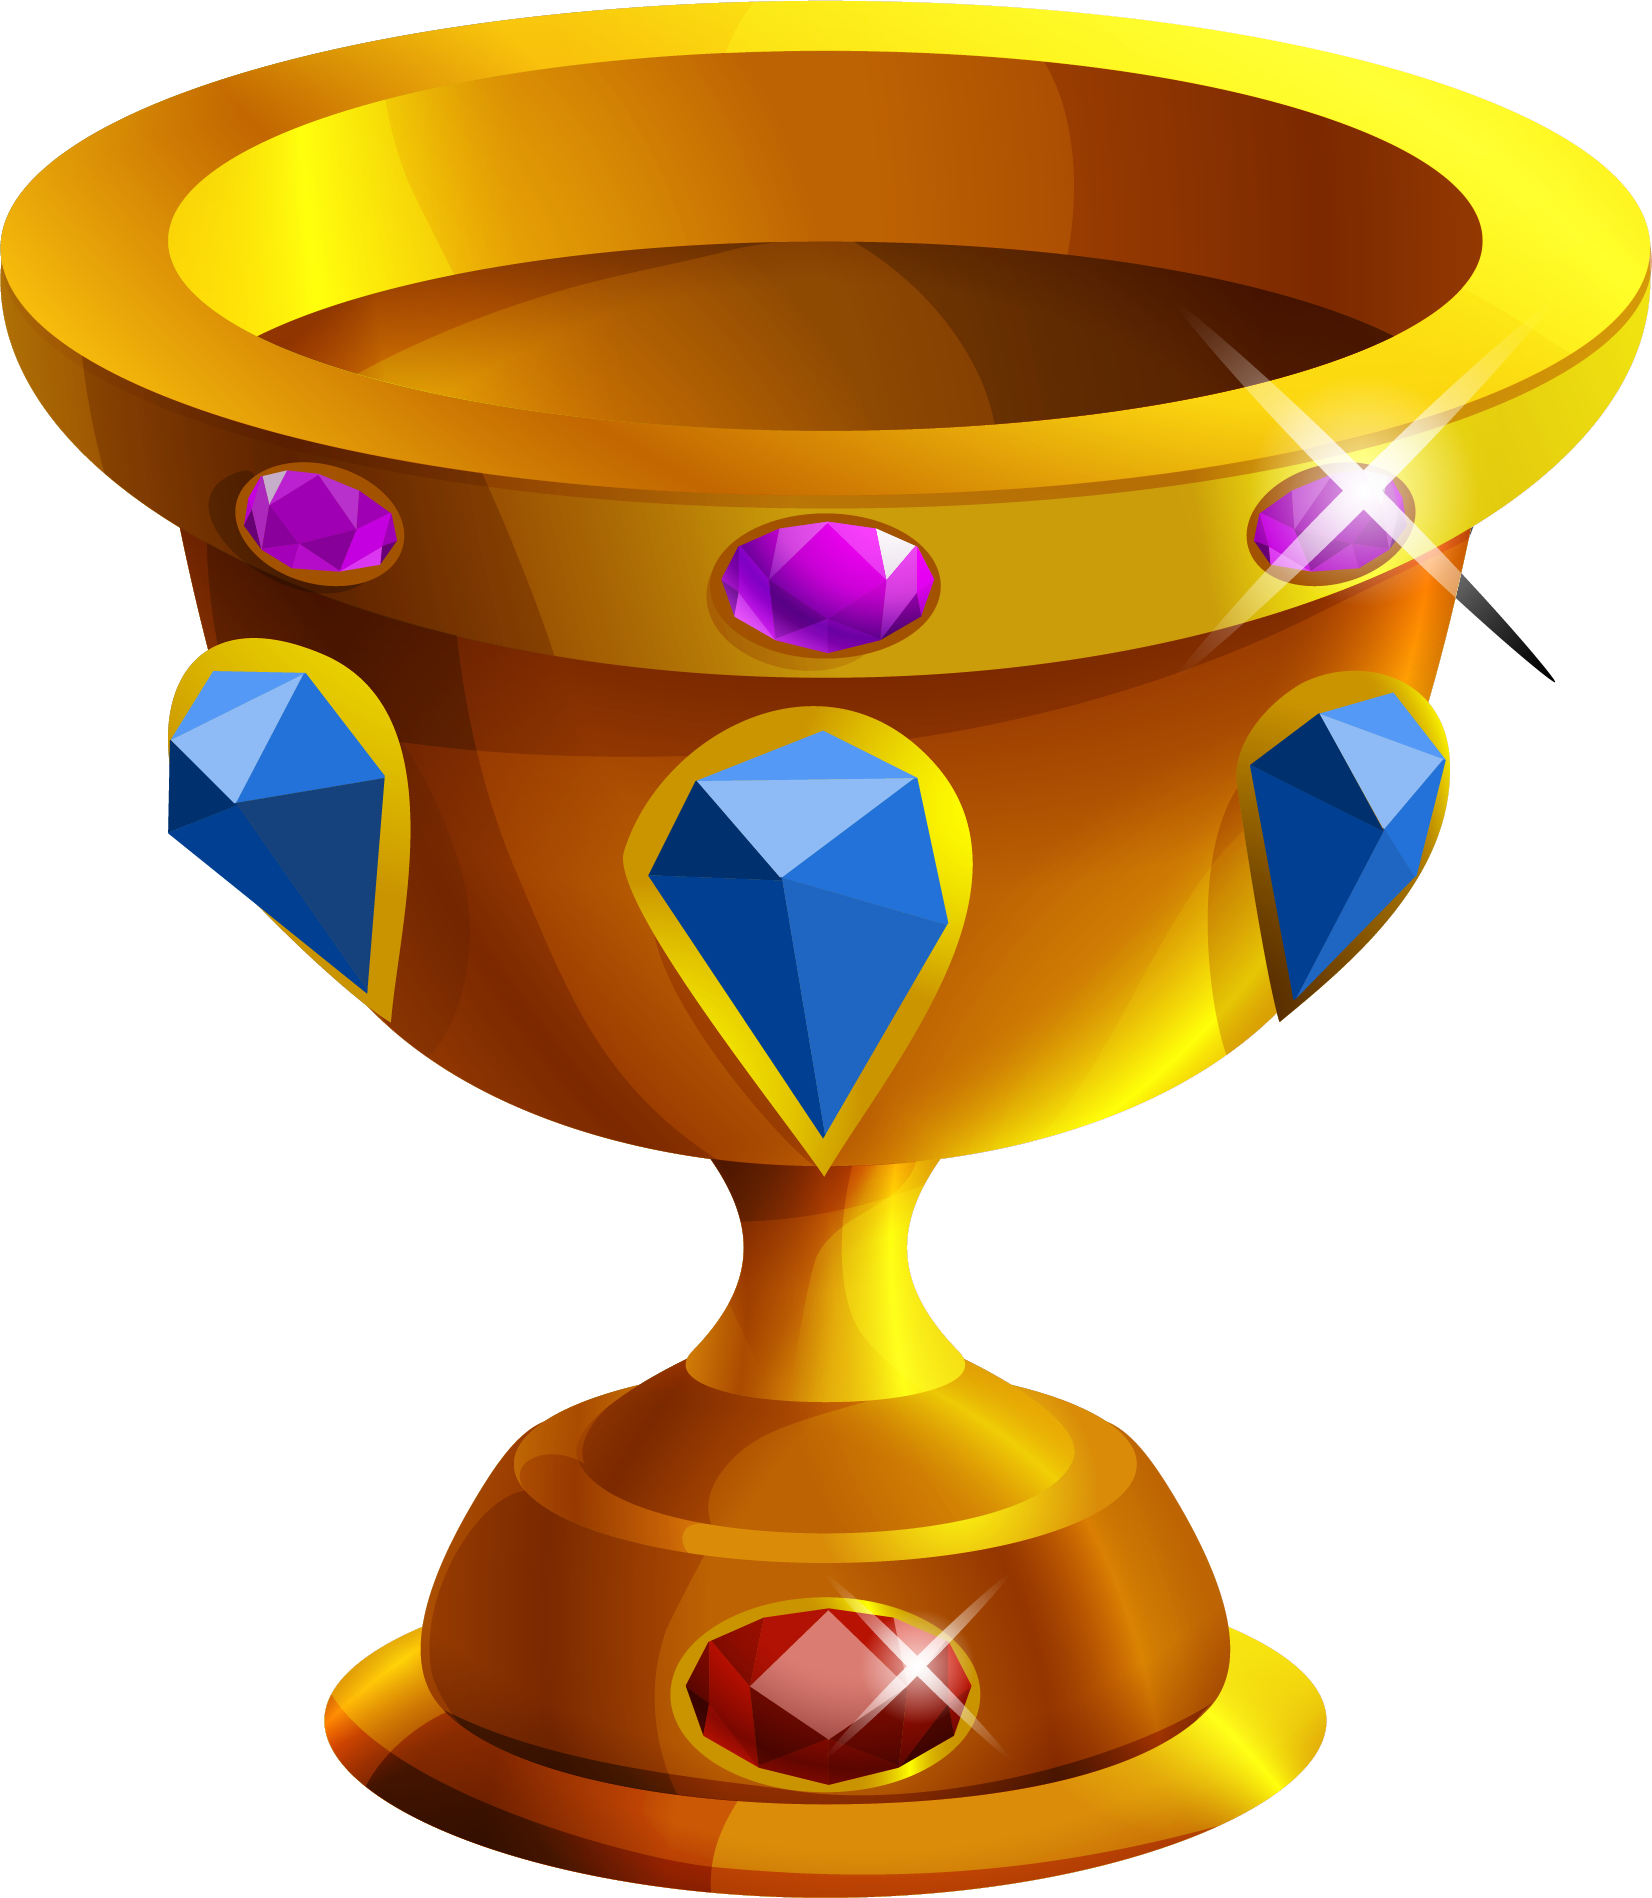 Diamond games cup game. Diamonds clipart trophy